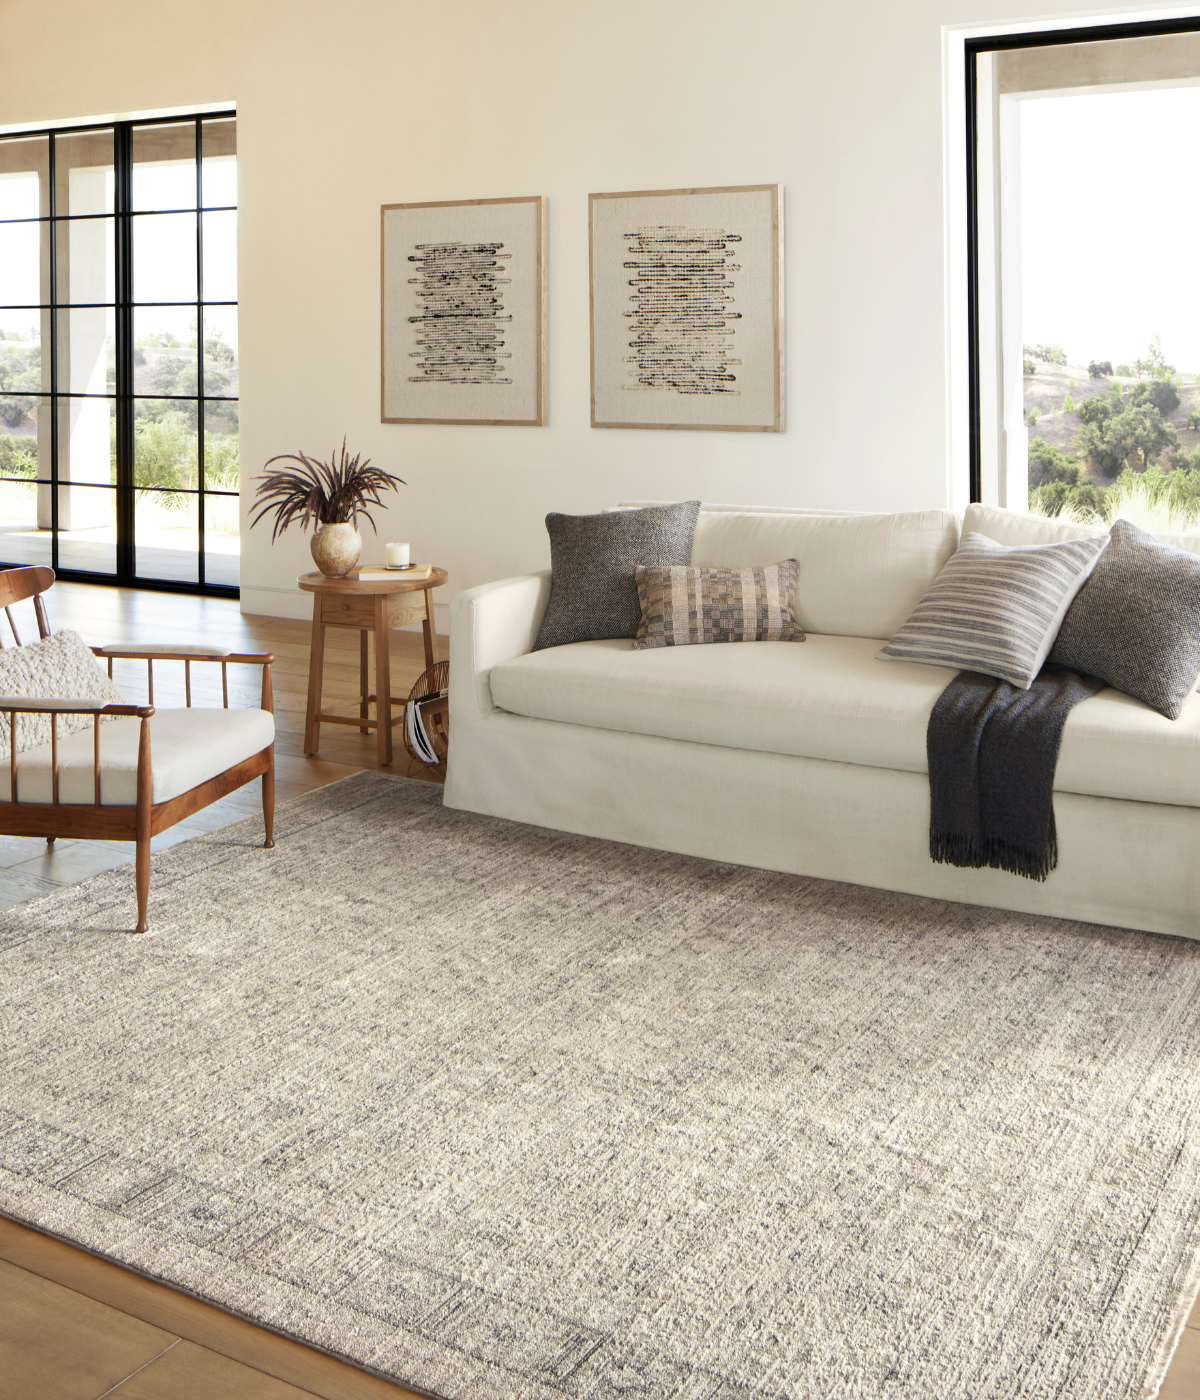 Choosing the Right Area Rug For Your Home